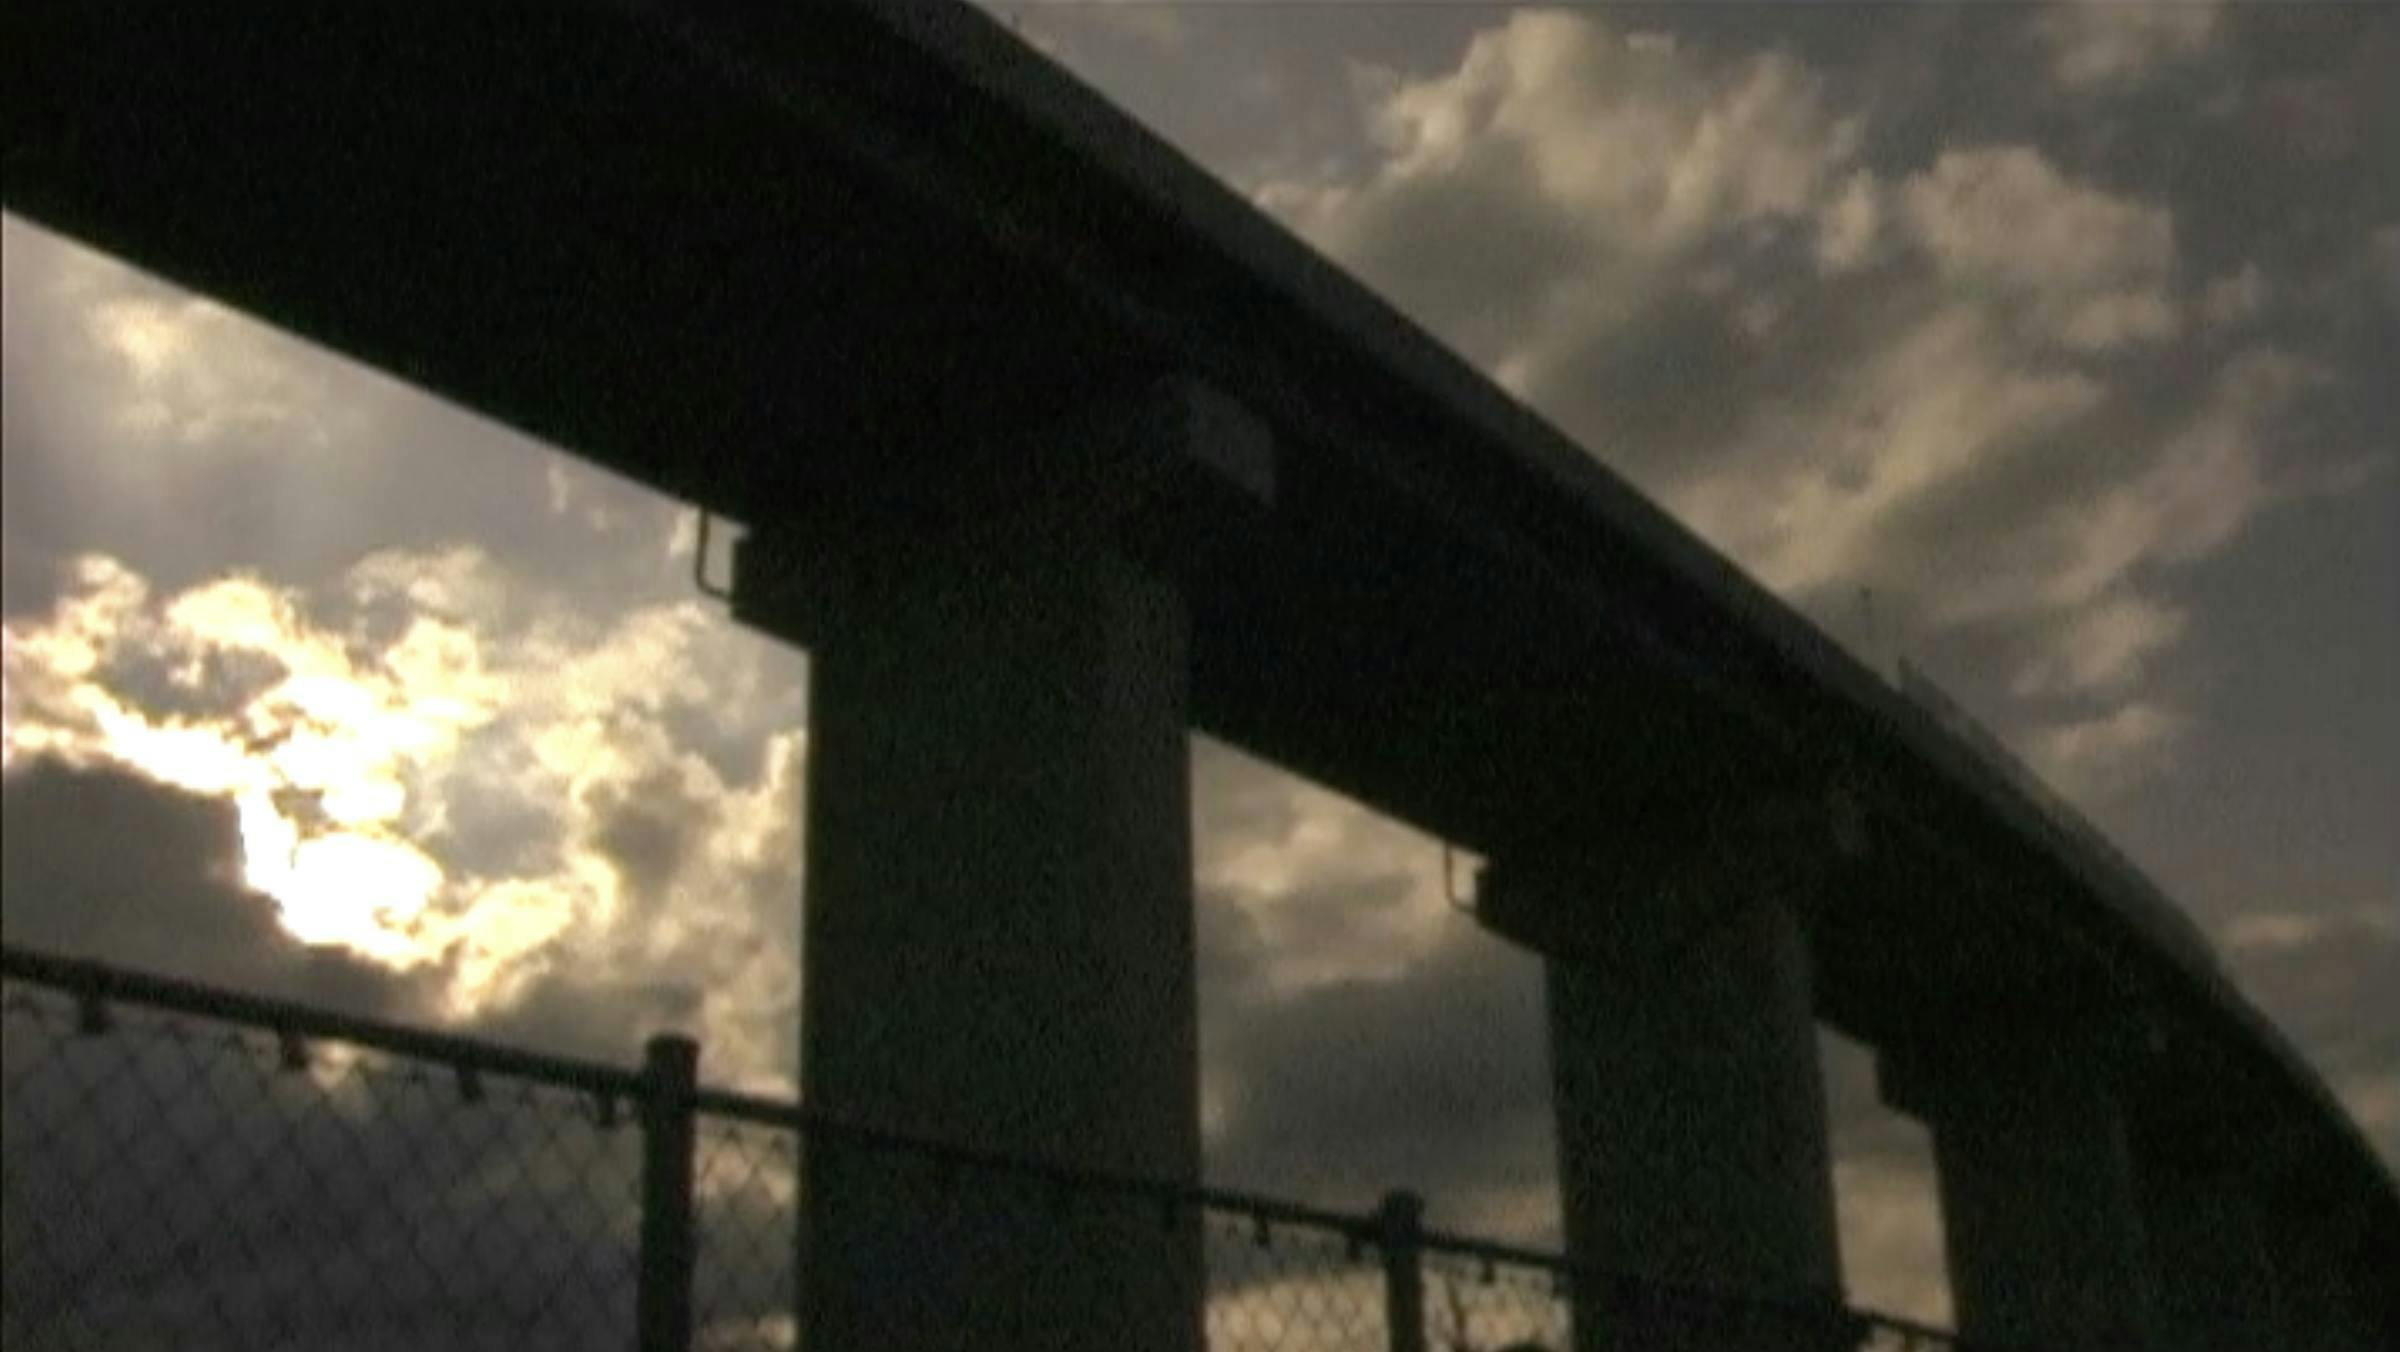 Image of a concrete underpass with chain link fence in the foreground, cast against a cloudy sky with the sun breaking through the clouds on the left.